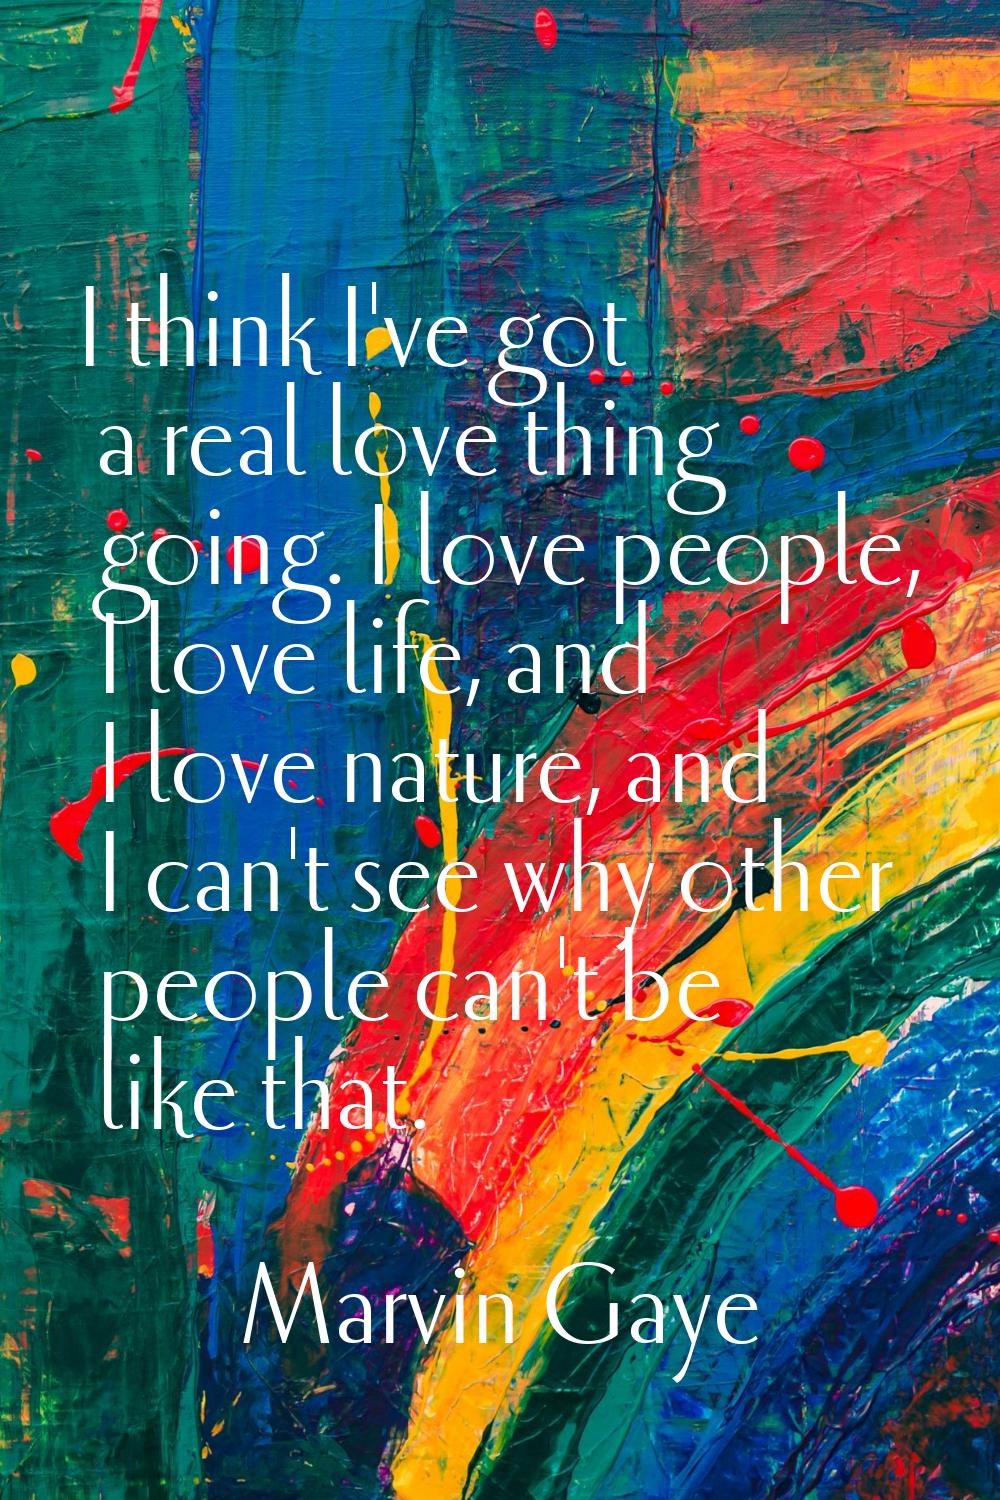 I think I've got a real love thing going. I love people, I love life, and I love nature, and I can'